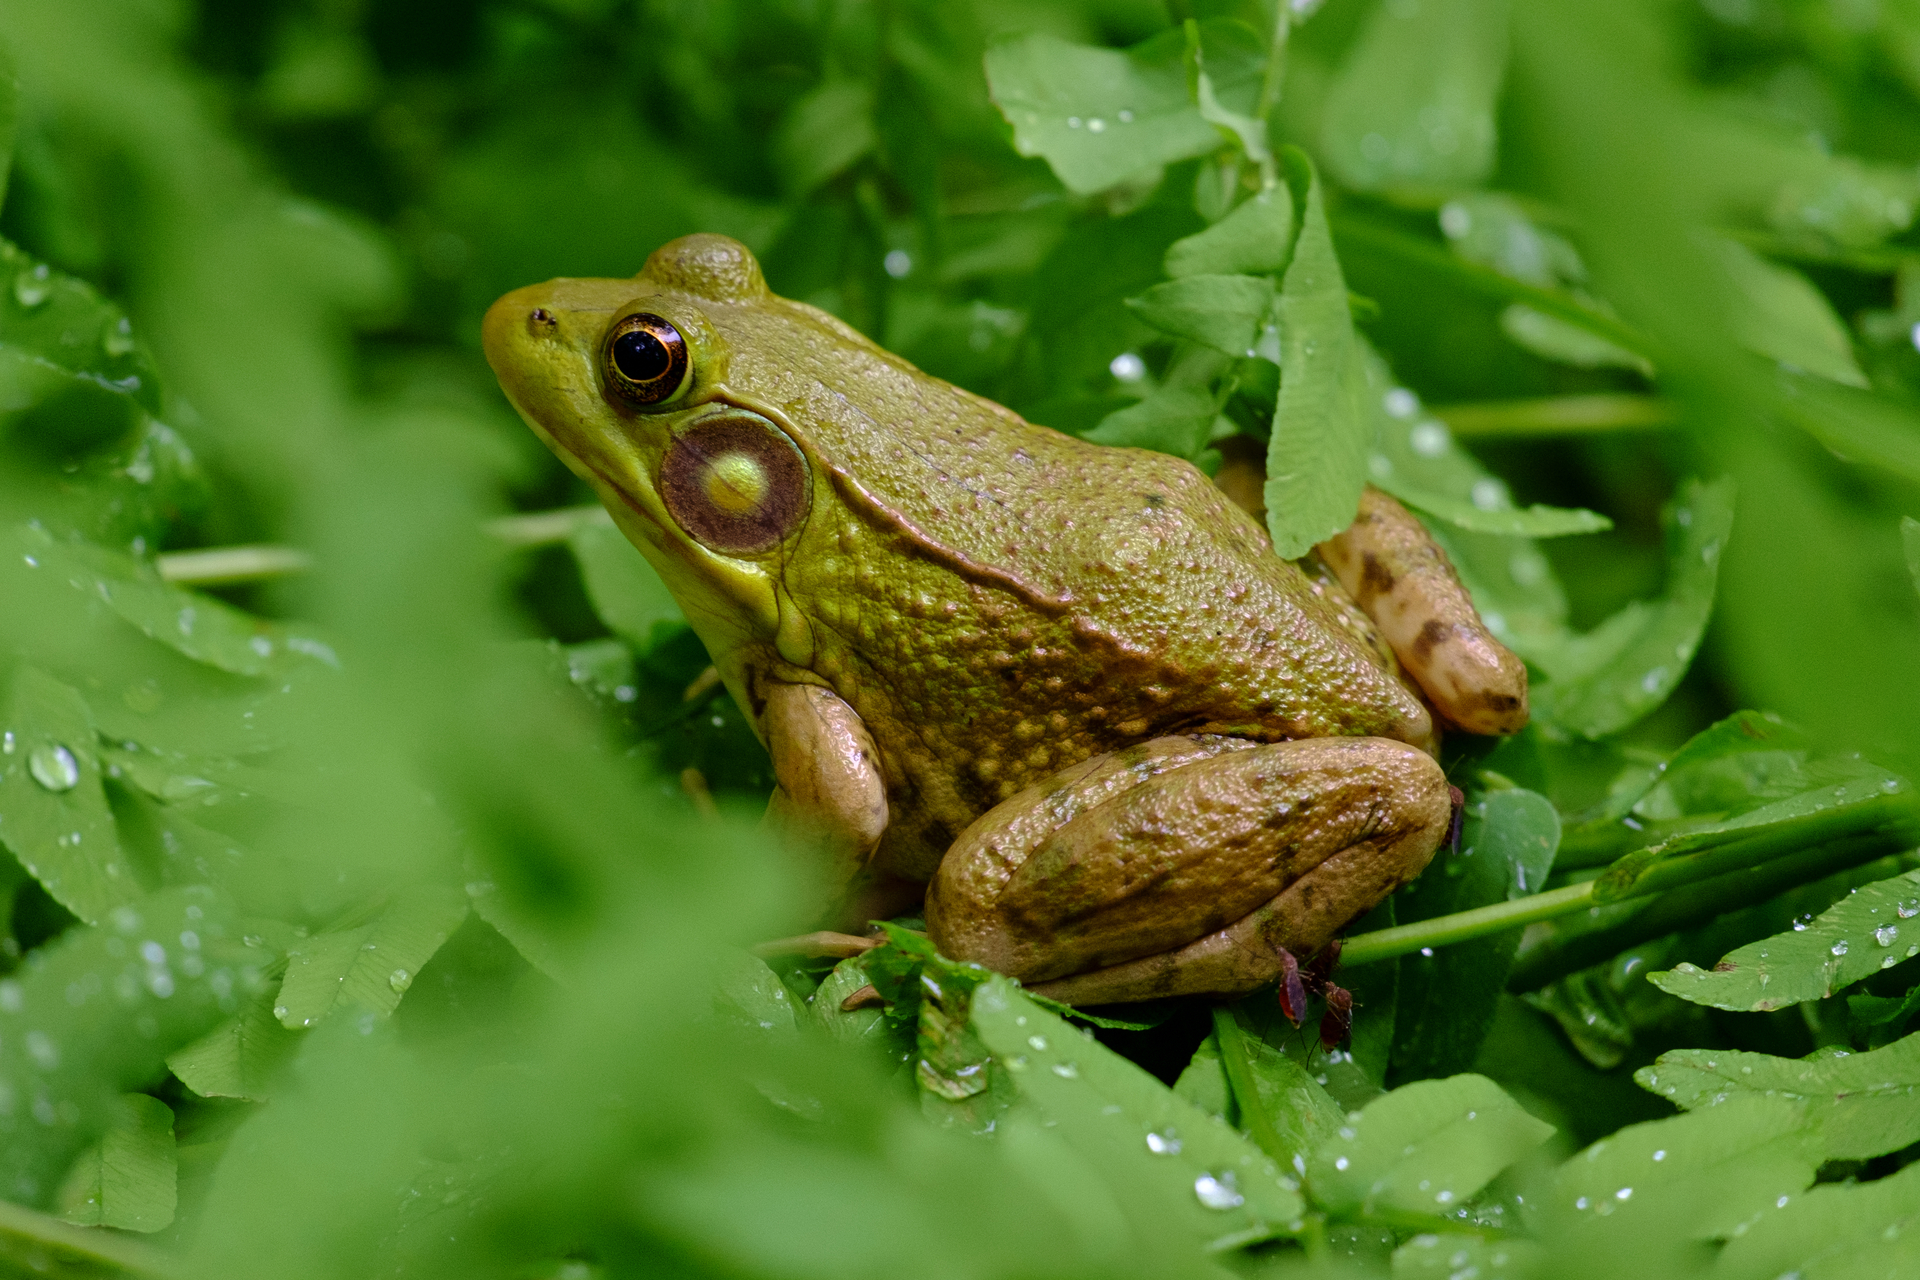 A green frog sitting on dewy leaves.